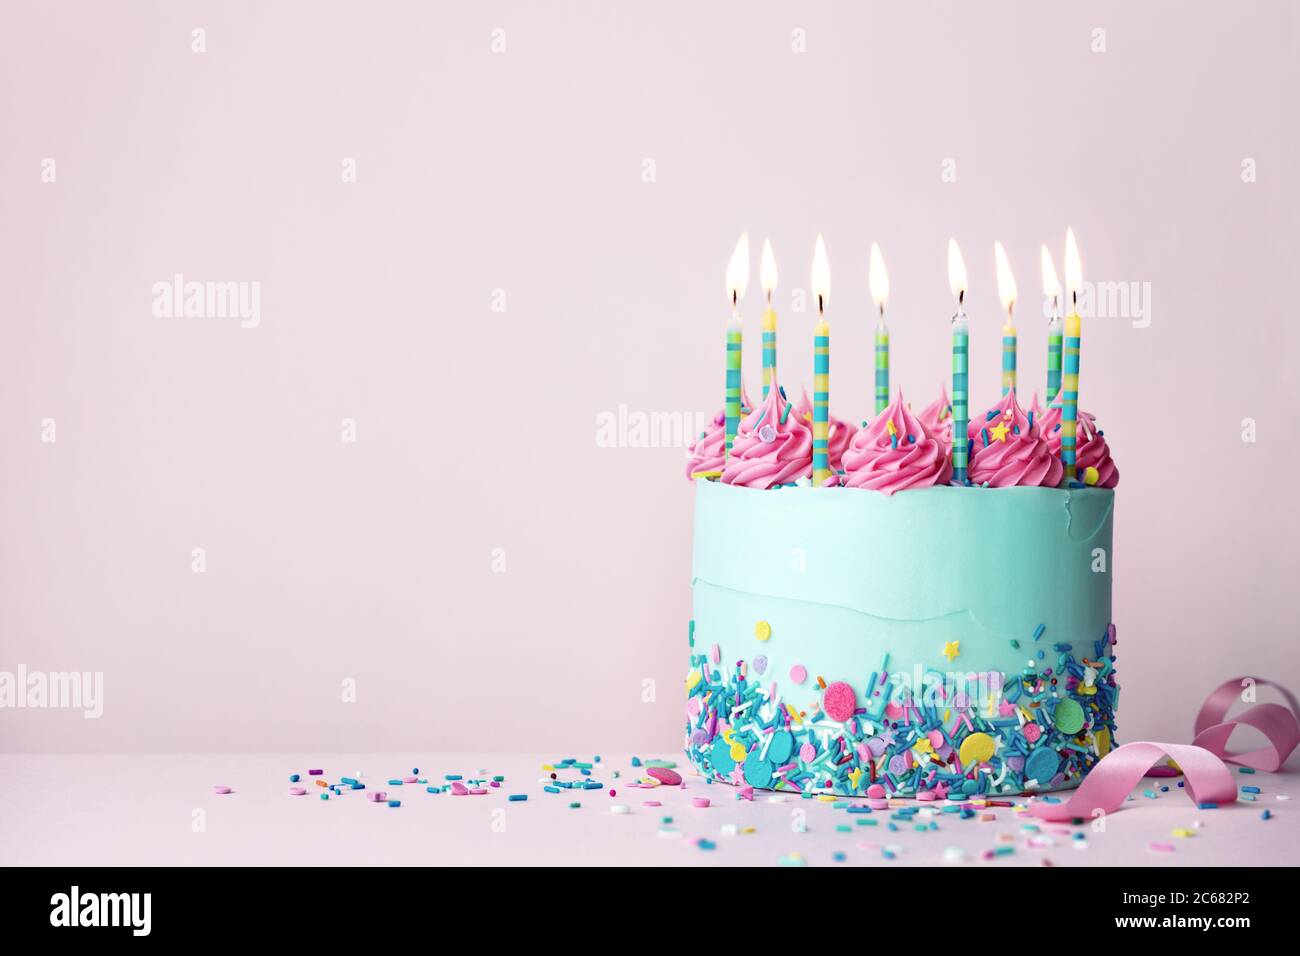 Pastel colored birthday cake with sprinkles and pink buttercream swirls Stock Photo